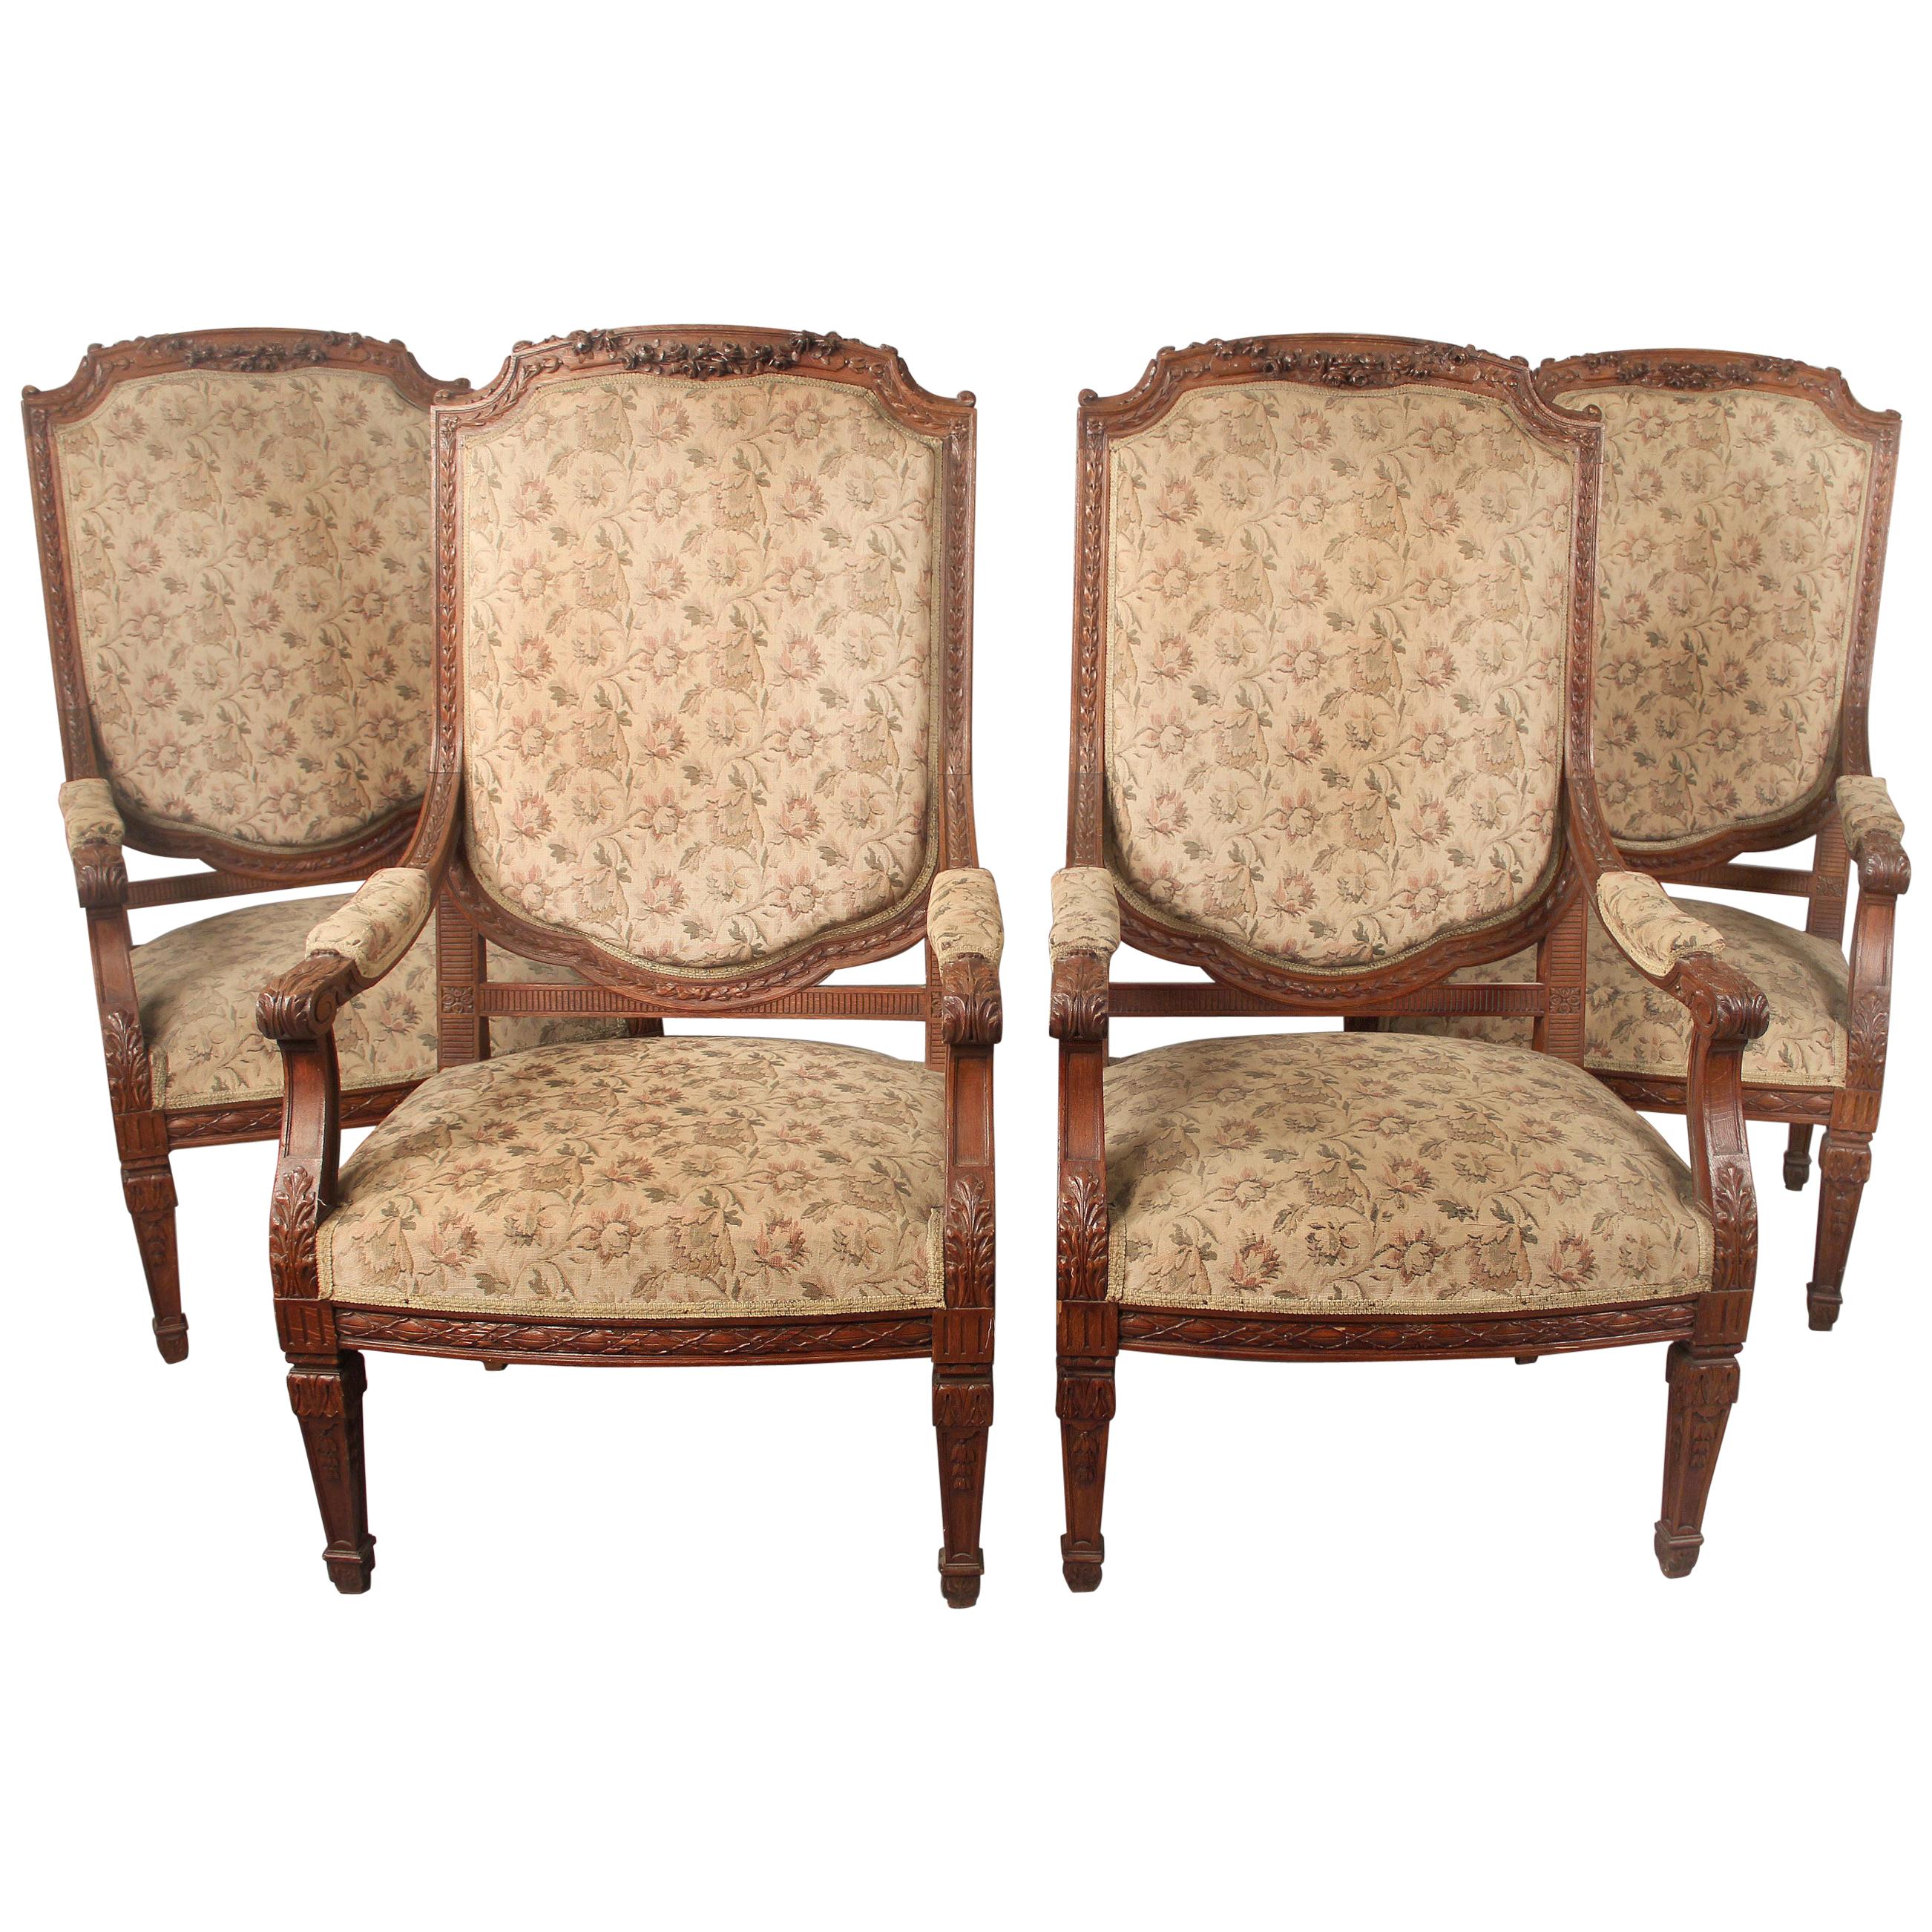 Impressive Set of Four Late 19th Century Louis XVI Style Carved Armchairs